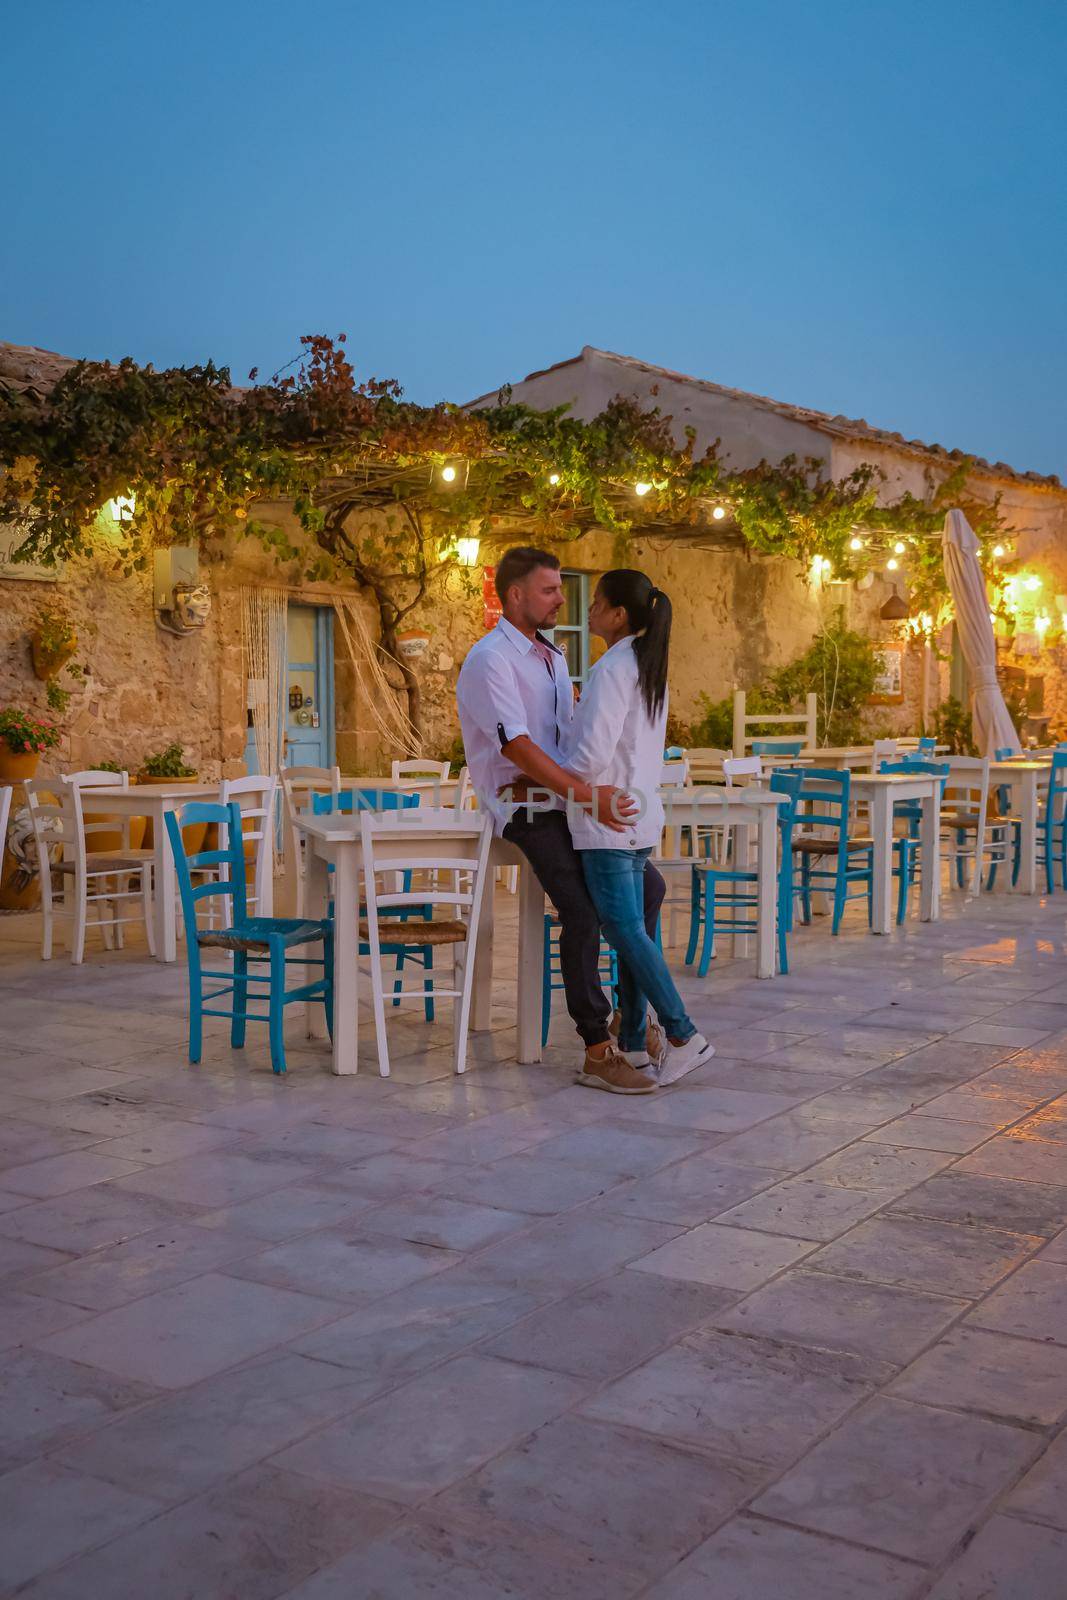 The picturesque village of Marzamemi, in the province of Syracuse, Sicily Italy, a couple on vacation in Sicilia